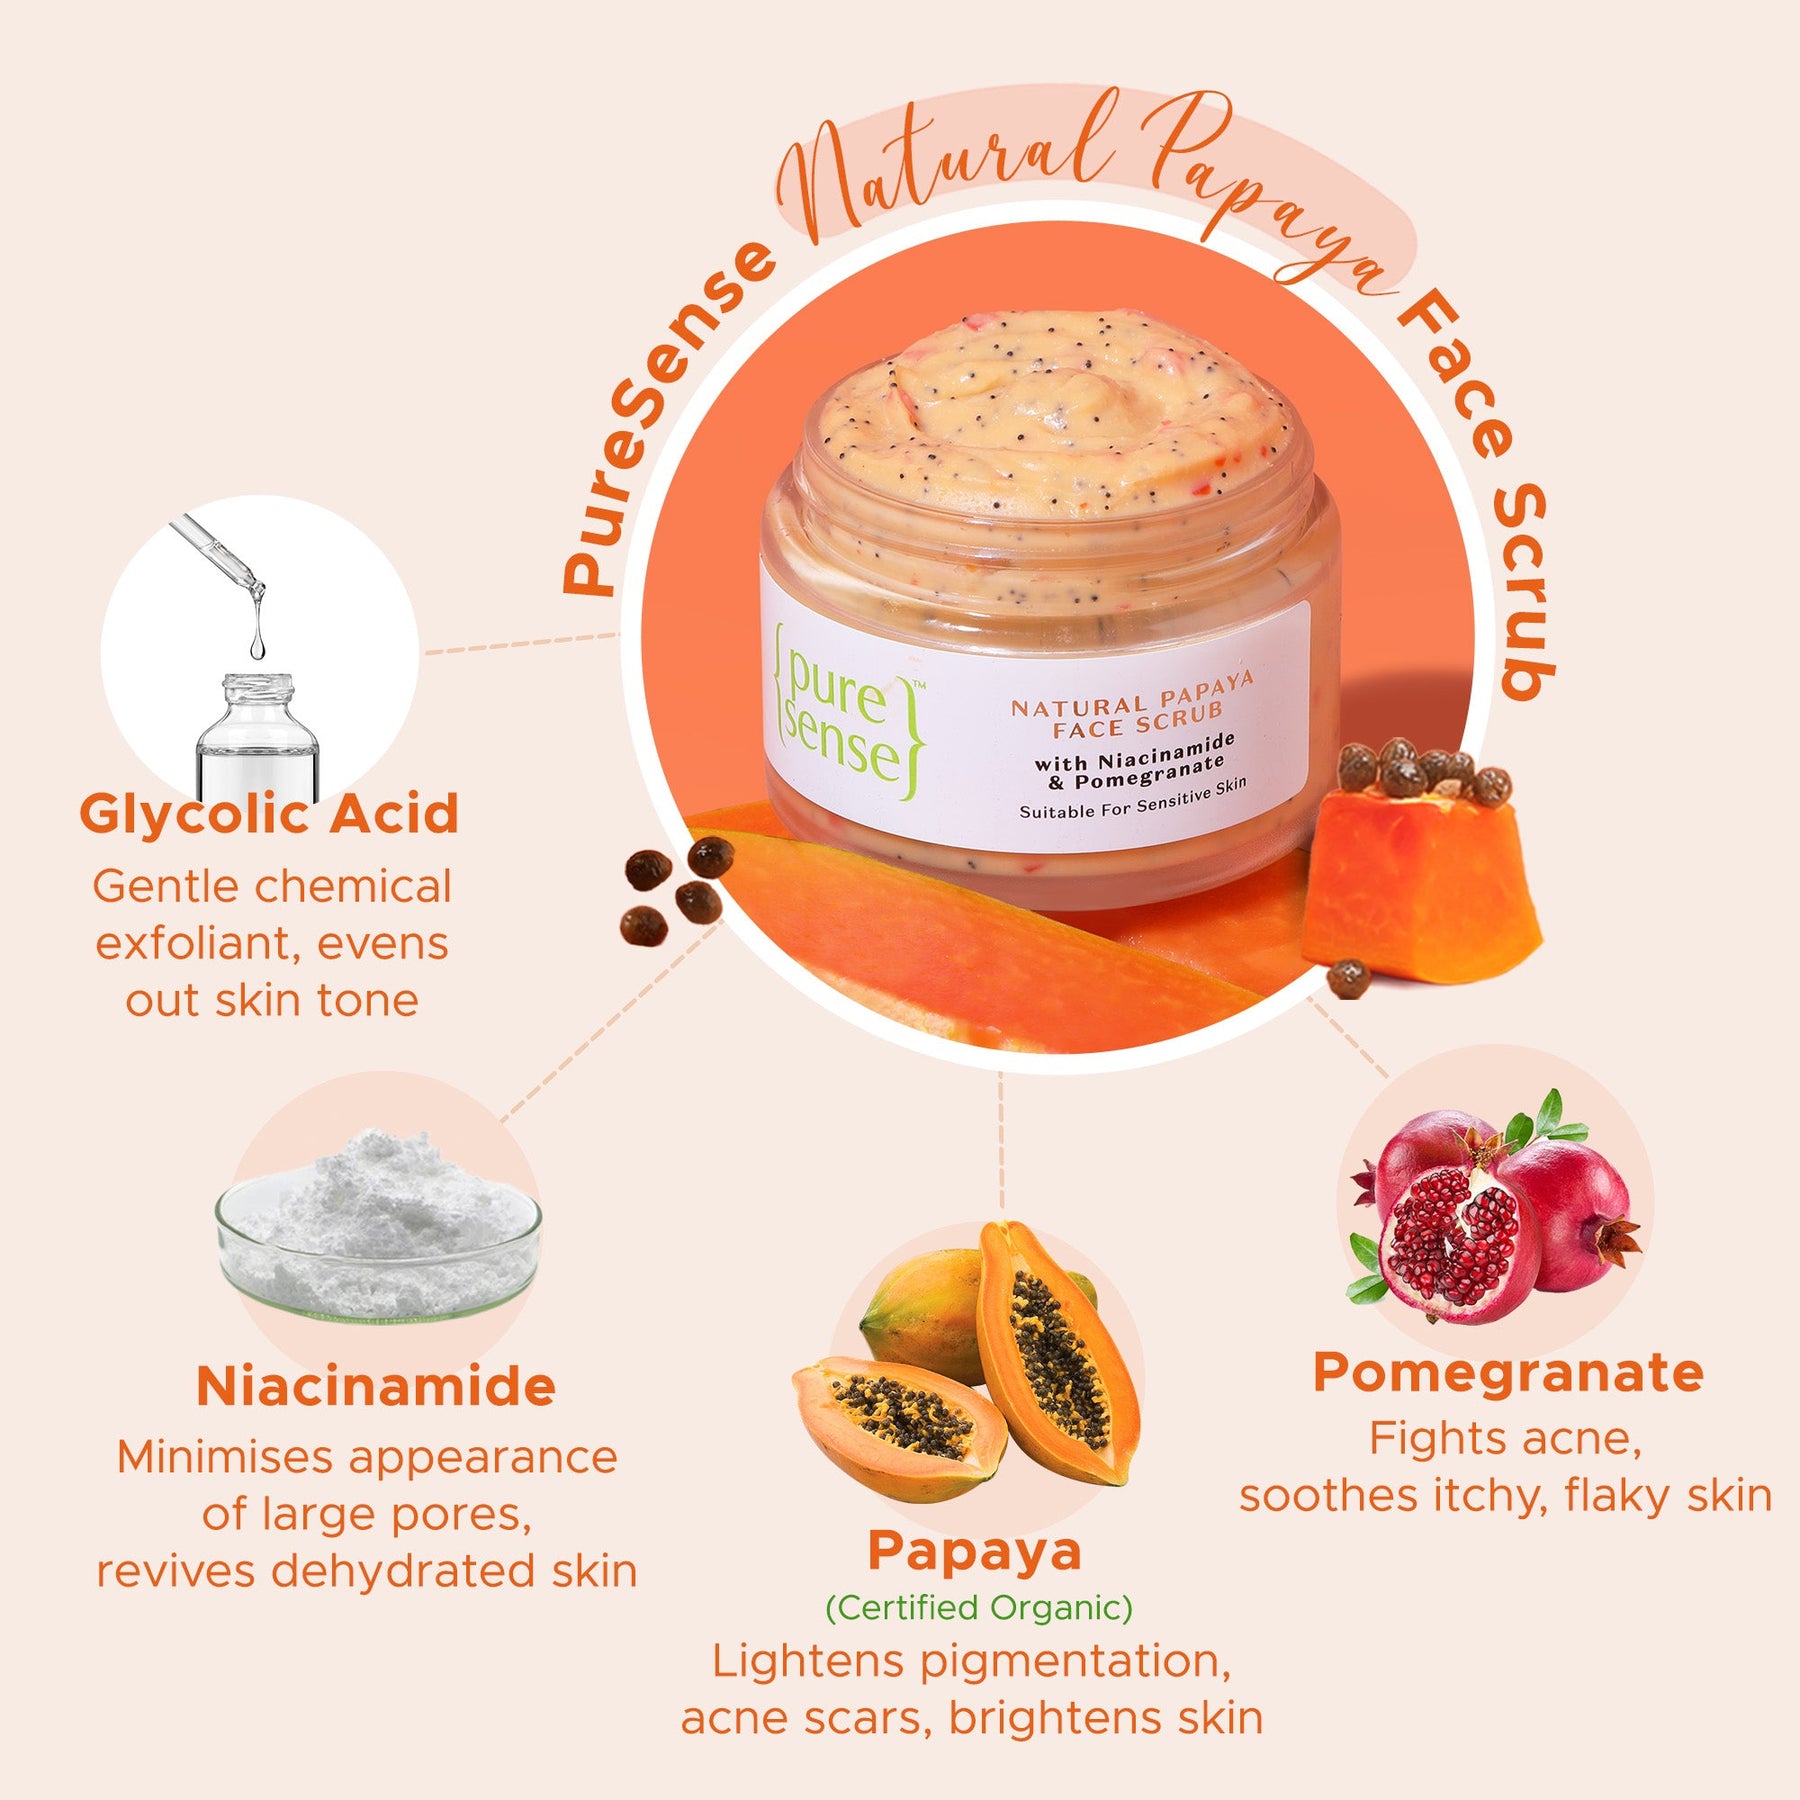 [CRED] Natural Papaya Face Scrub (Pack of 2) | From the makers of Parachute Advansed | 100ml